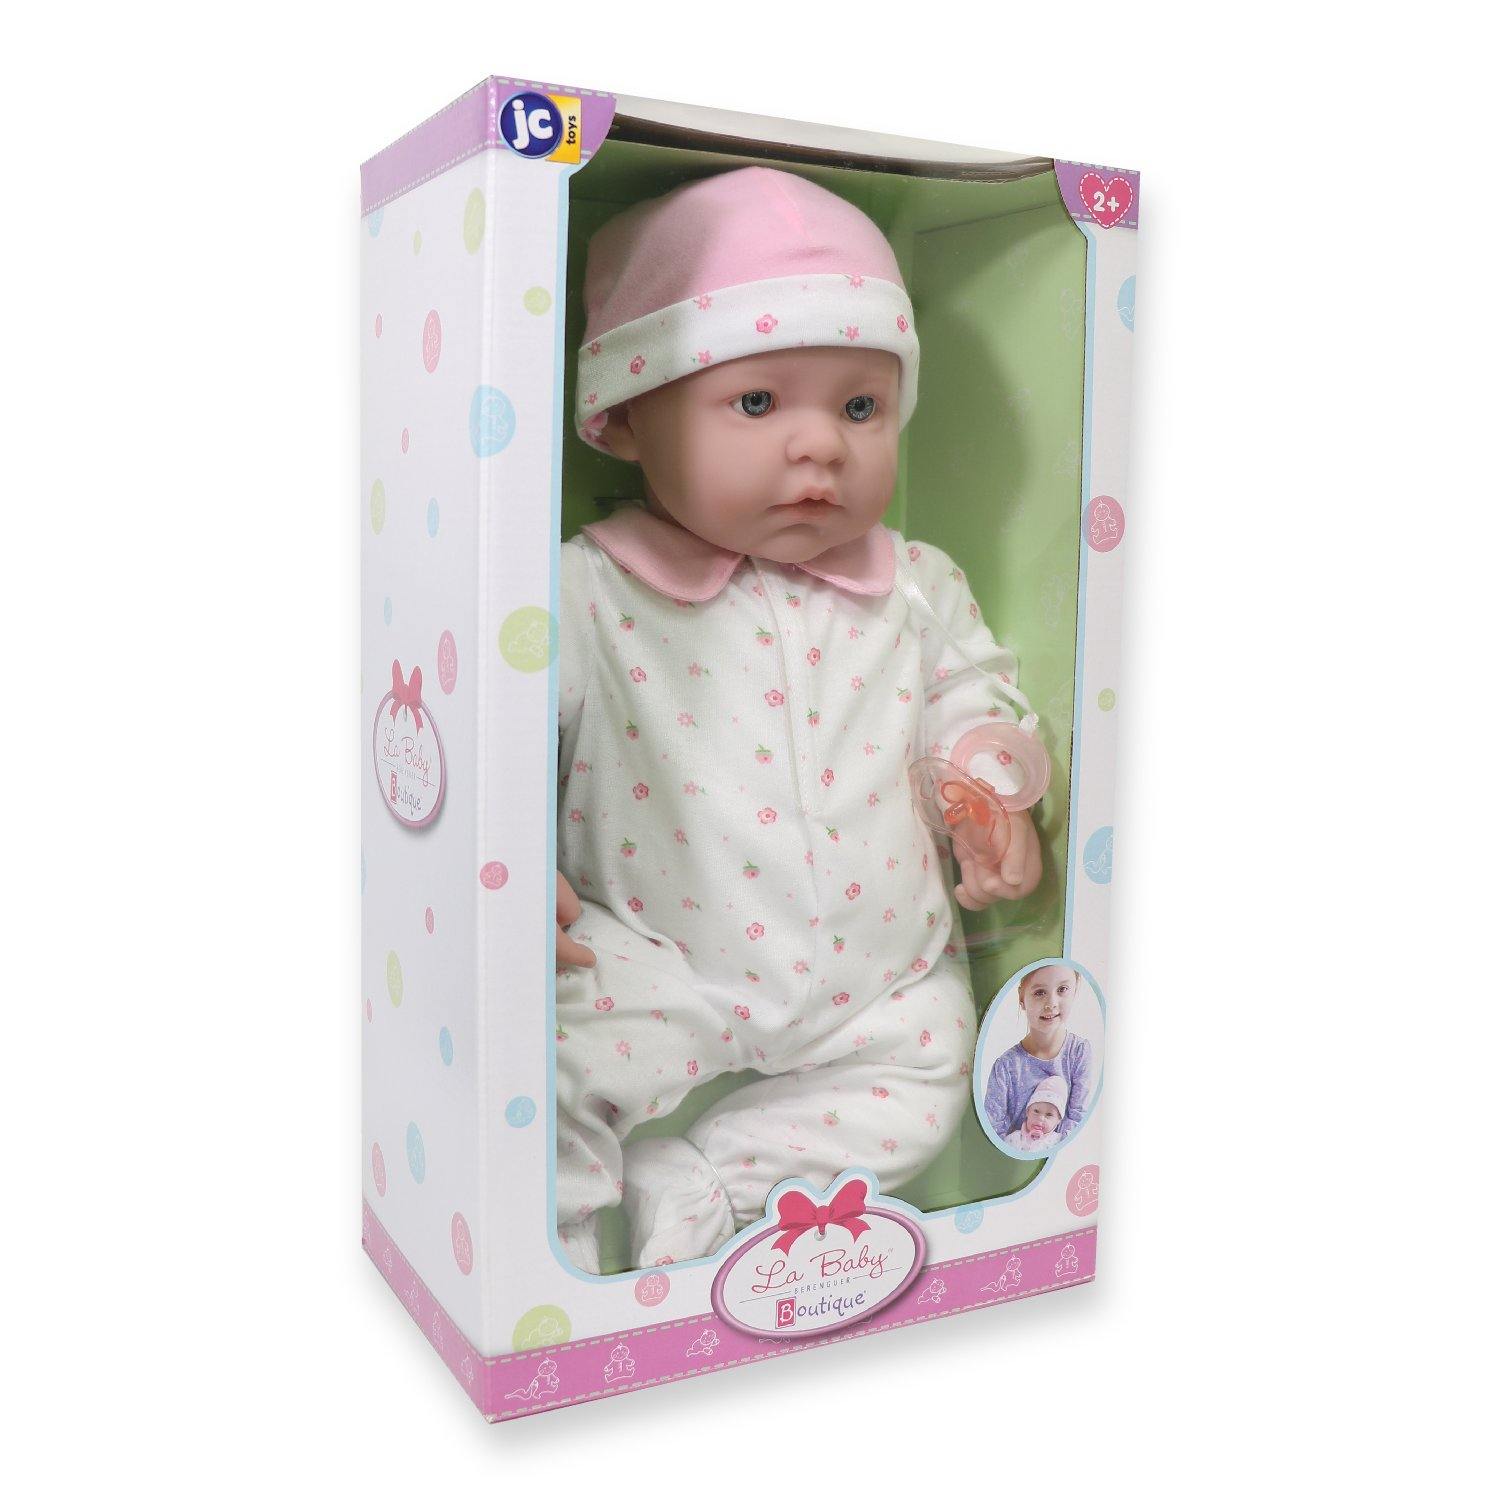 La Baby Play Doll - 20" Soft Body Baby Doll in baby outfit Pink w/ Pacifier - JC Toys Group Inc.